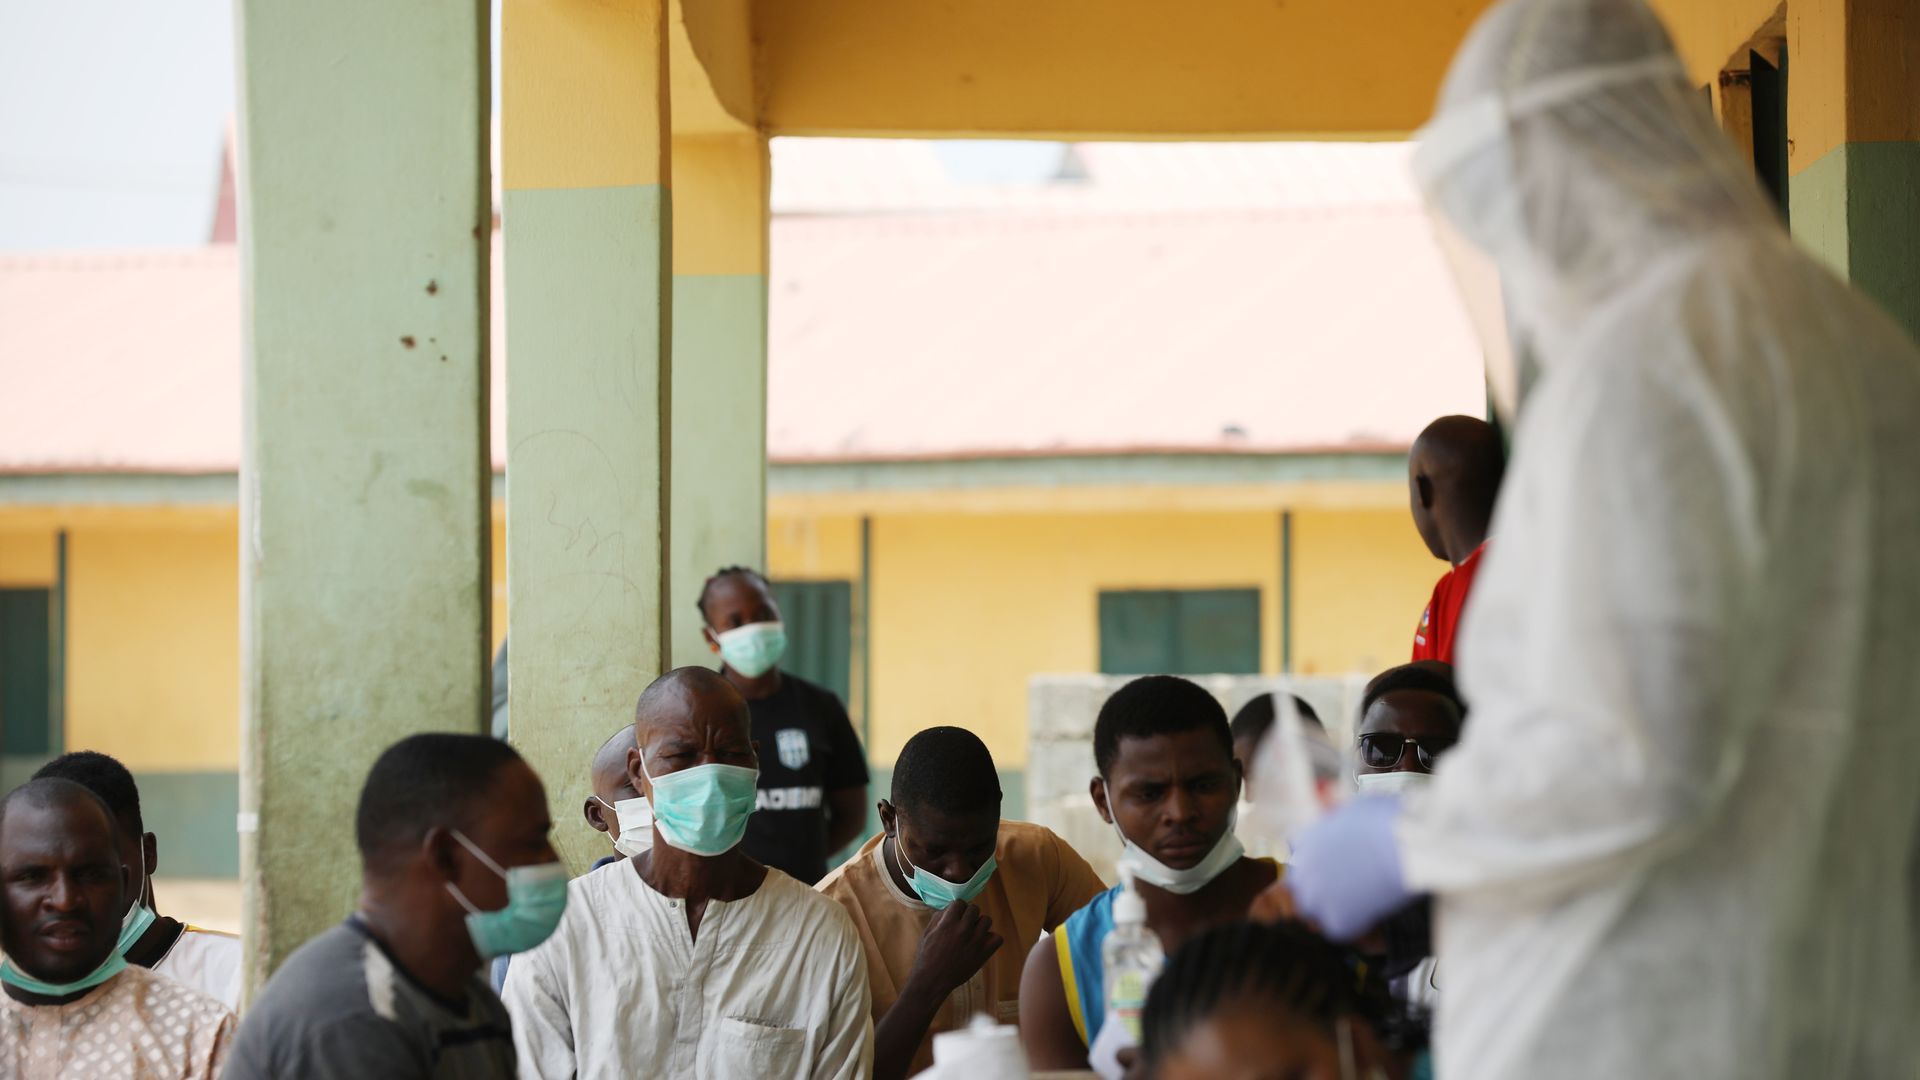 health workers prepare to take samples during a community COVID-19 coronavirus testing campaign